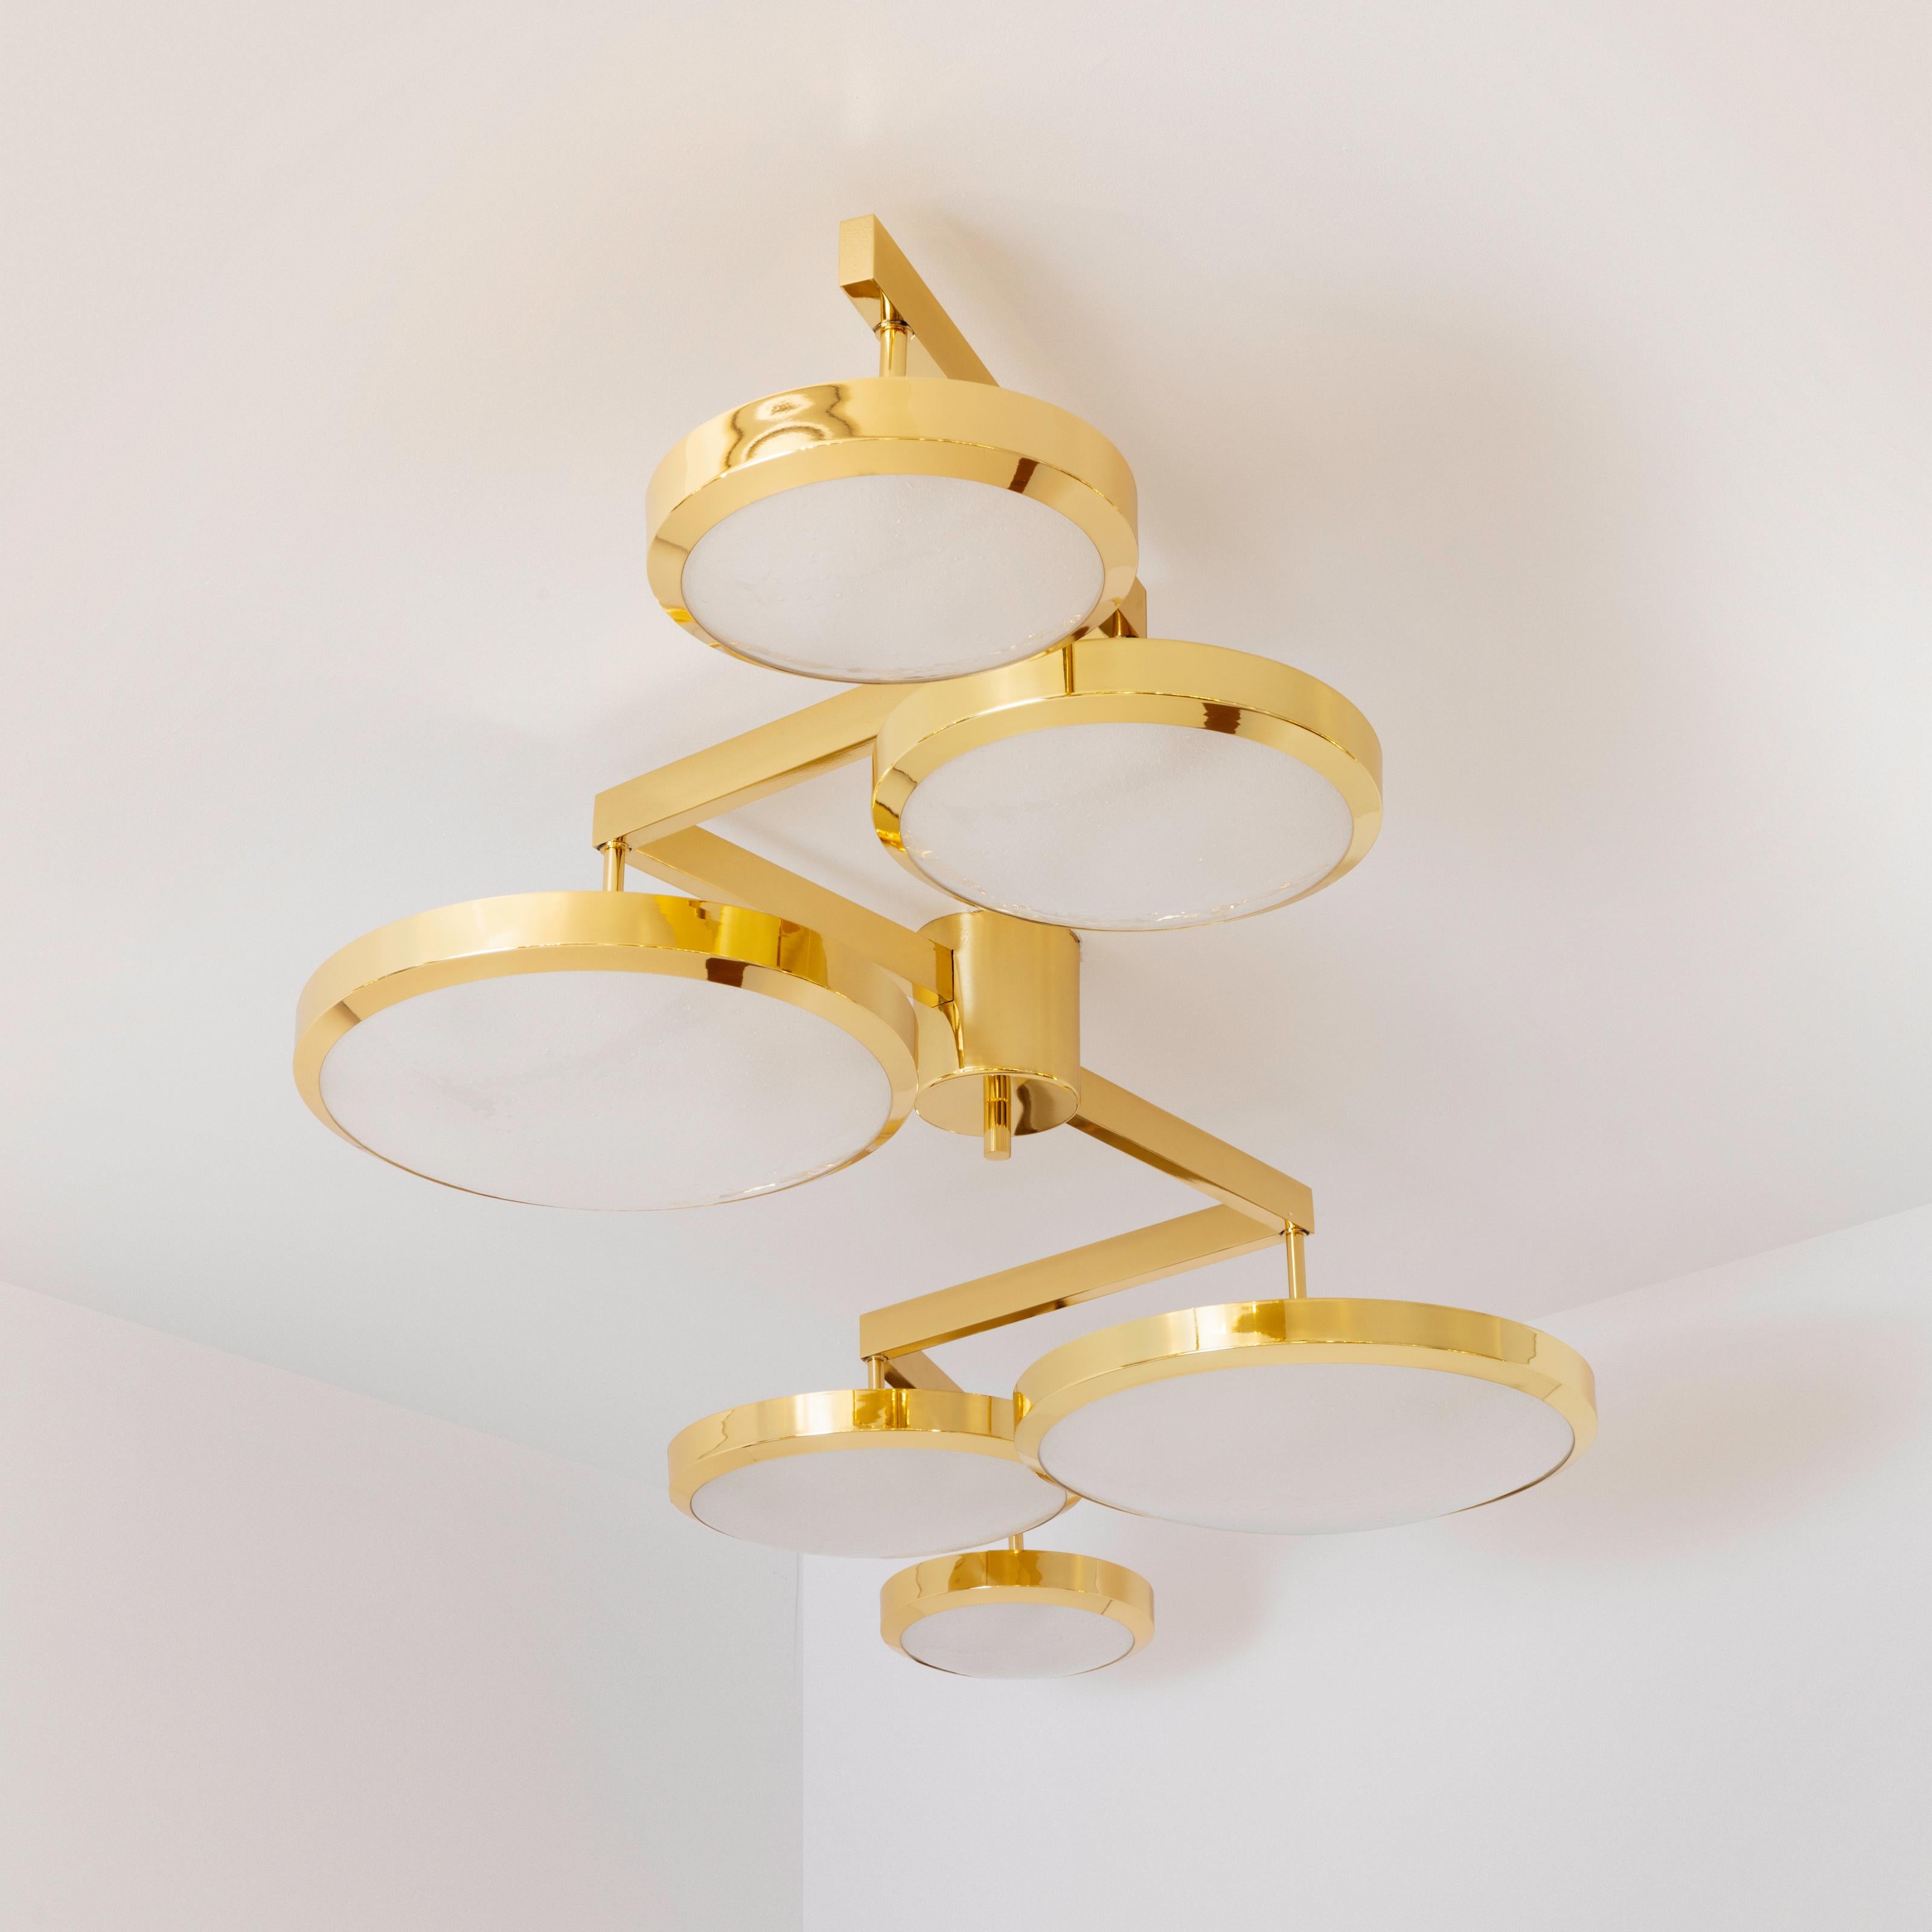 Geometria Sospesa Ceiling Light by Gaspare Asaro-Polished Nickel Finish In New Condition For Sale In New York, NY